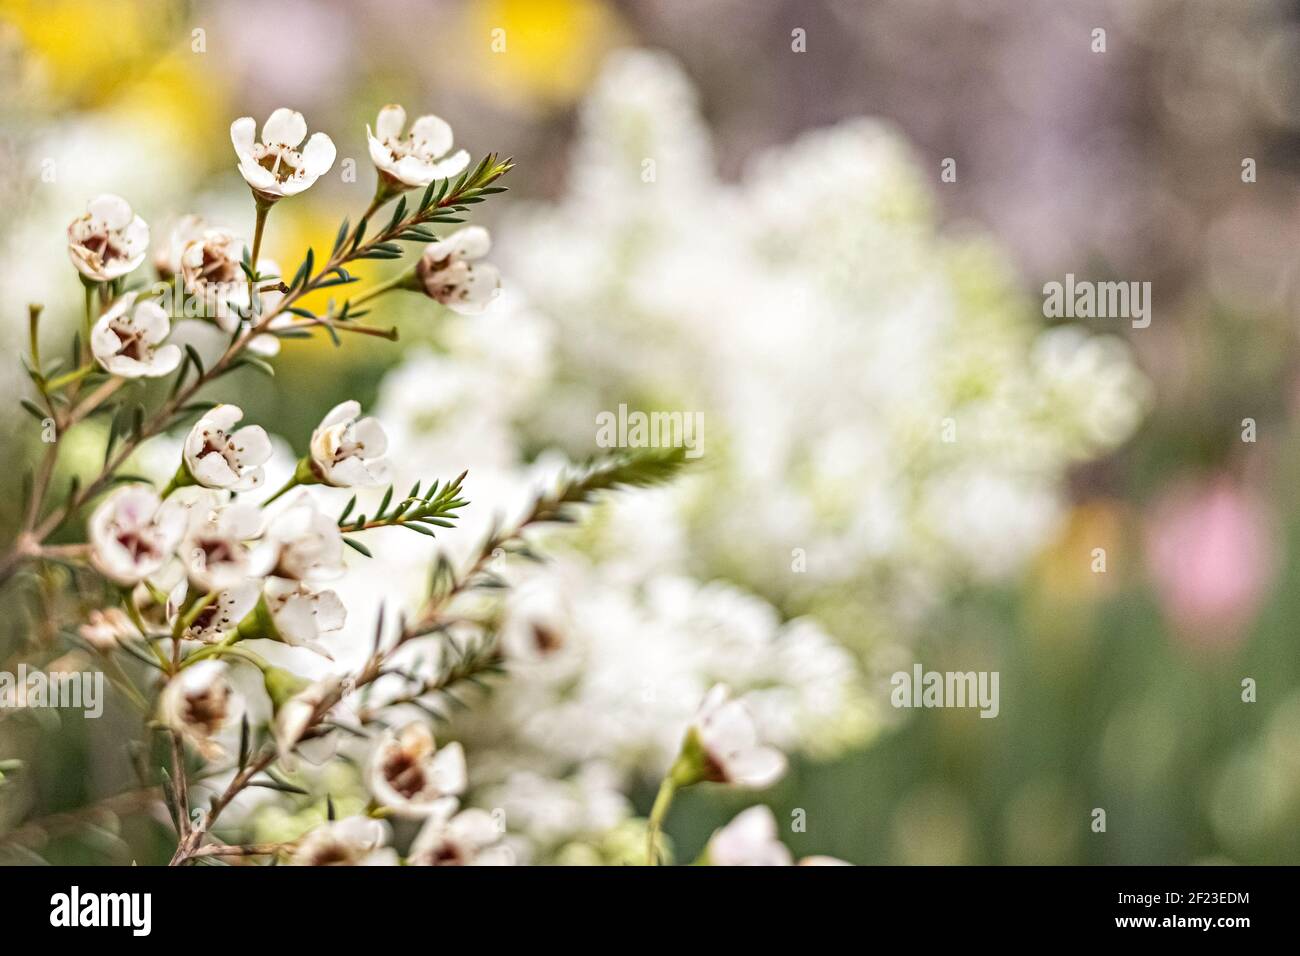 Erica's flowering bush with small flowers in the garden. Spring time. Stock Photo